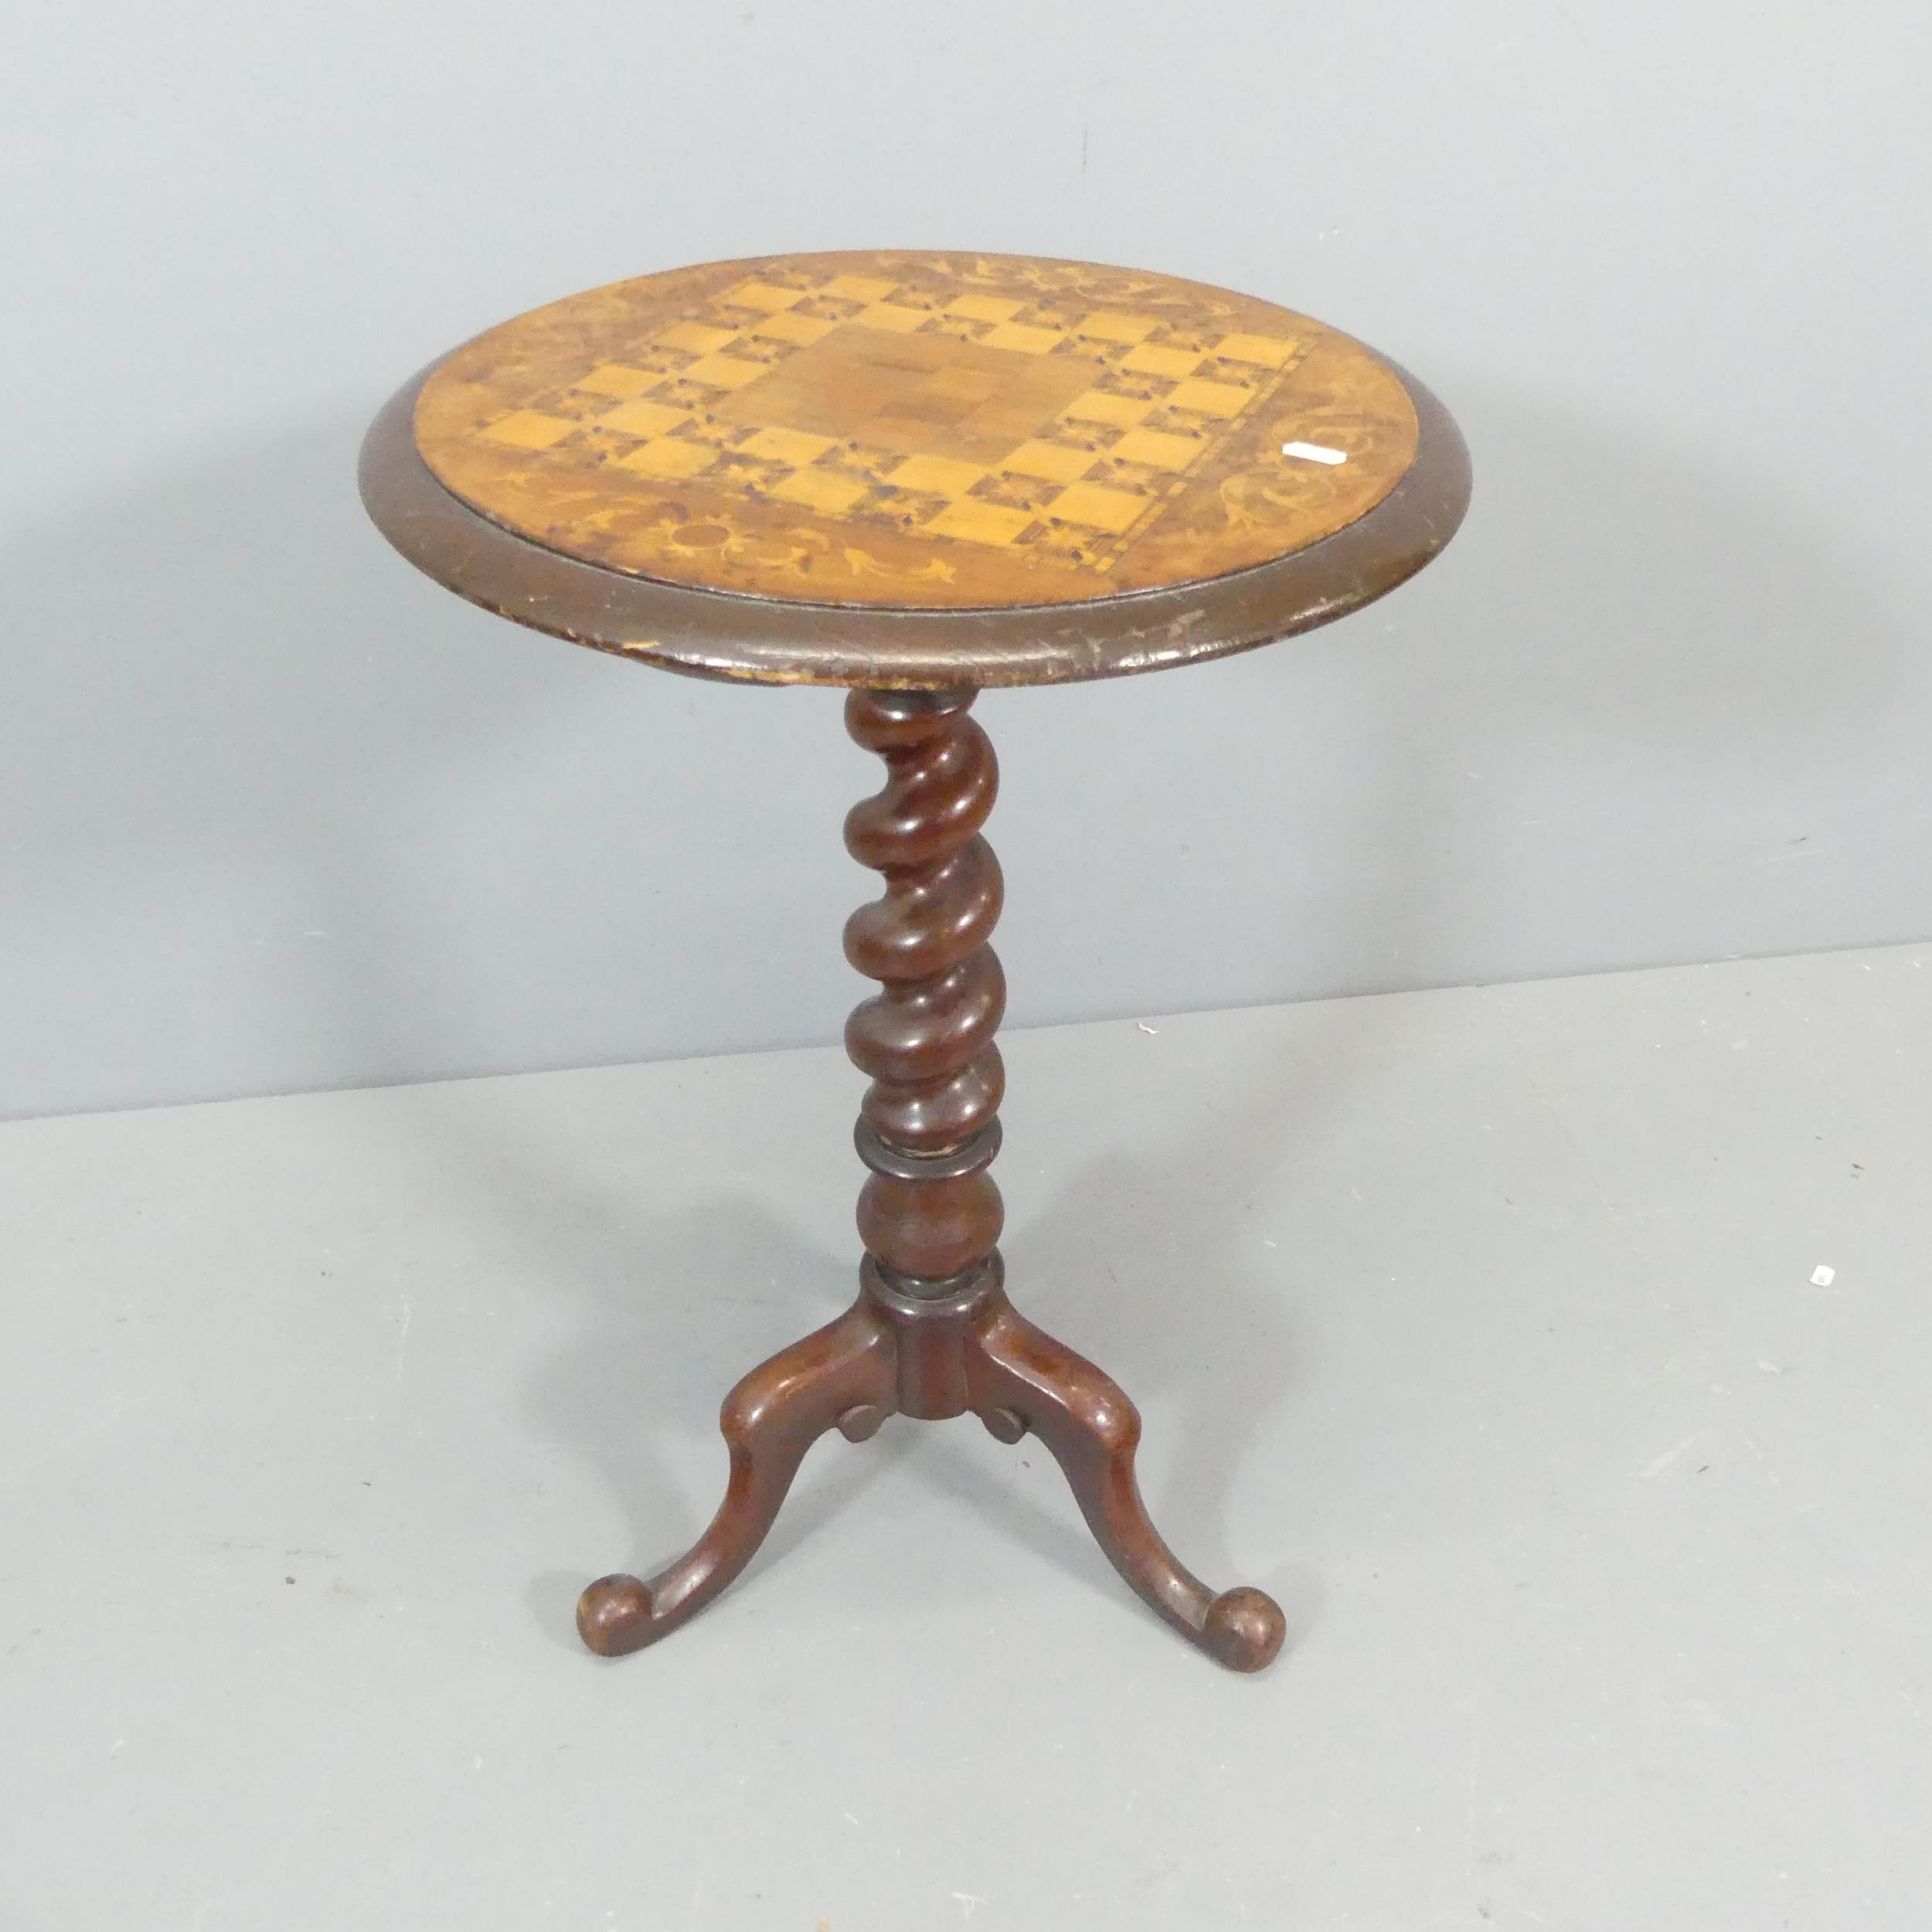 A 19th century mahogany and walnut veneered circular occasional table, with specimen inlaid games-